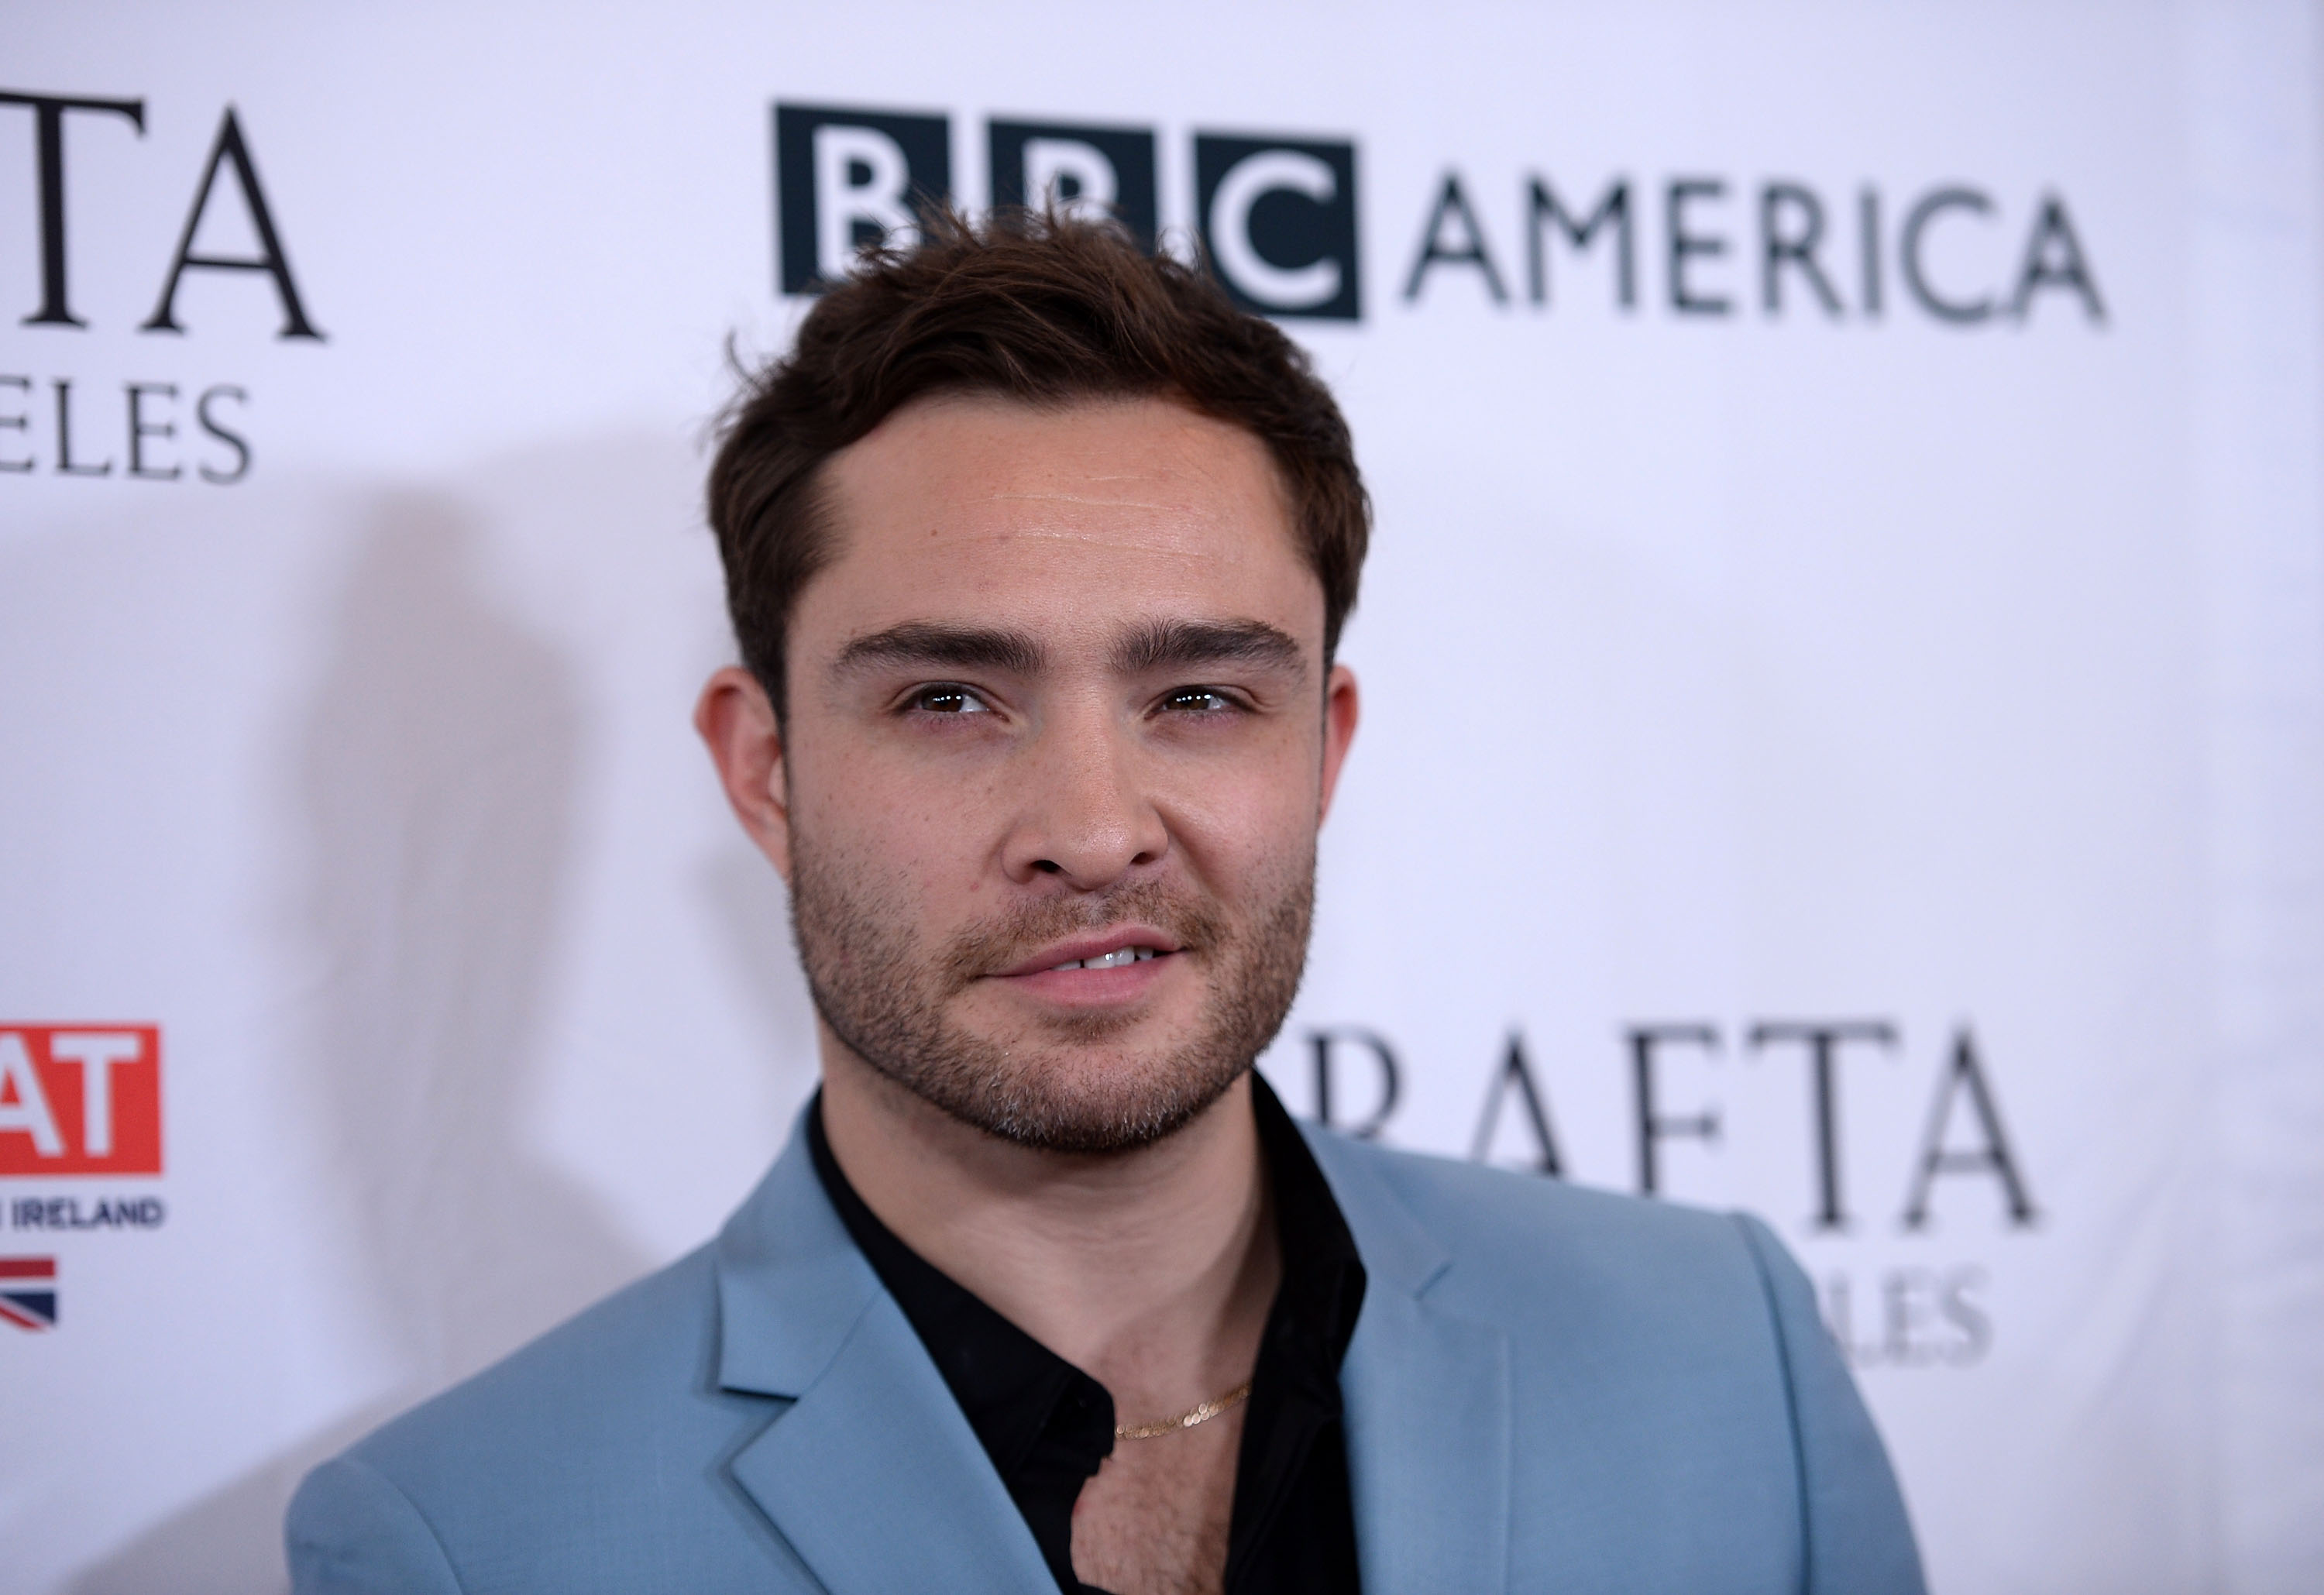 BEVERLY HILLS, CA - SEPTEMBER 16: Actor Ed Westwick arrives at the BBC America BAFTA Los Angeles TV Tea Party 2017 at The Beverly Hilton Hotel on September 16, 2017 in Beverly Hills, California. (Photo by Amanda Edwards/WireImage) (Amanda Edwards—WireImage)